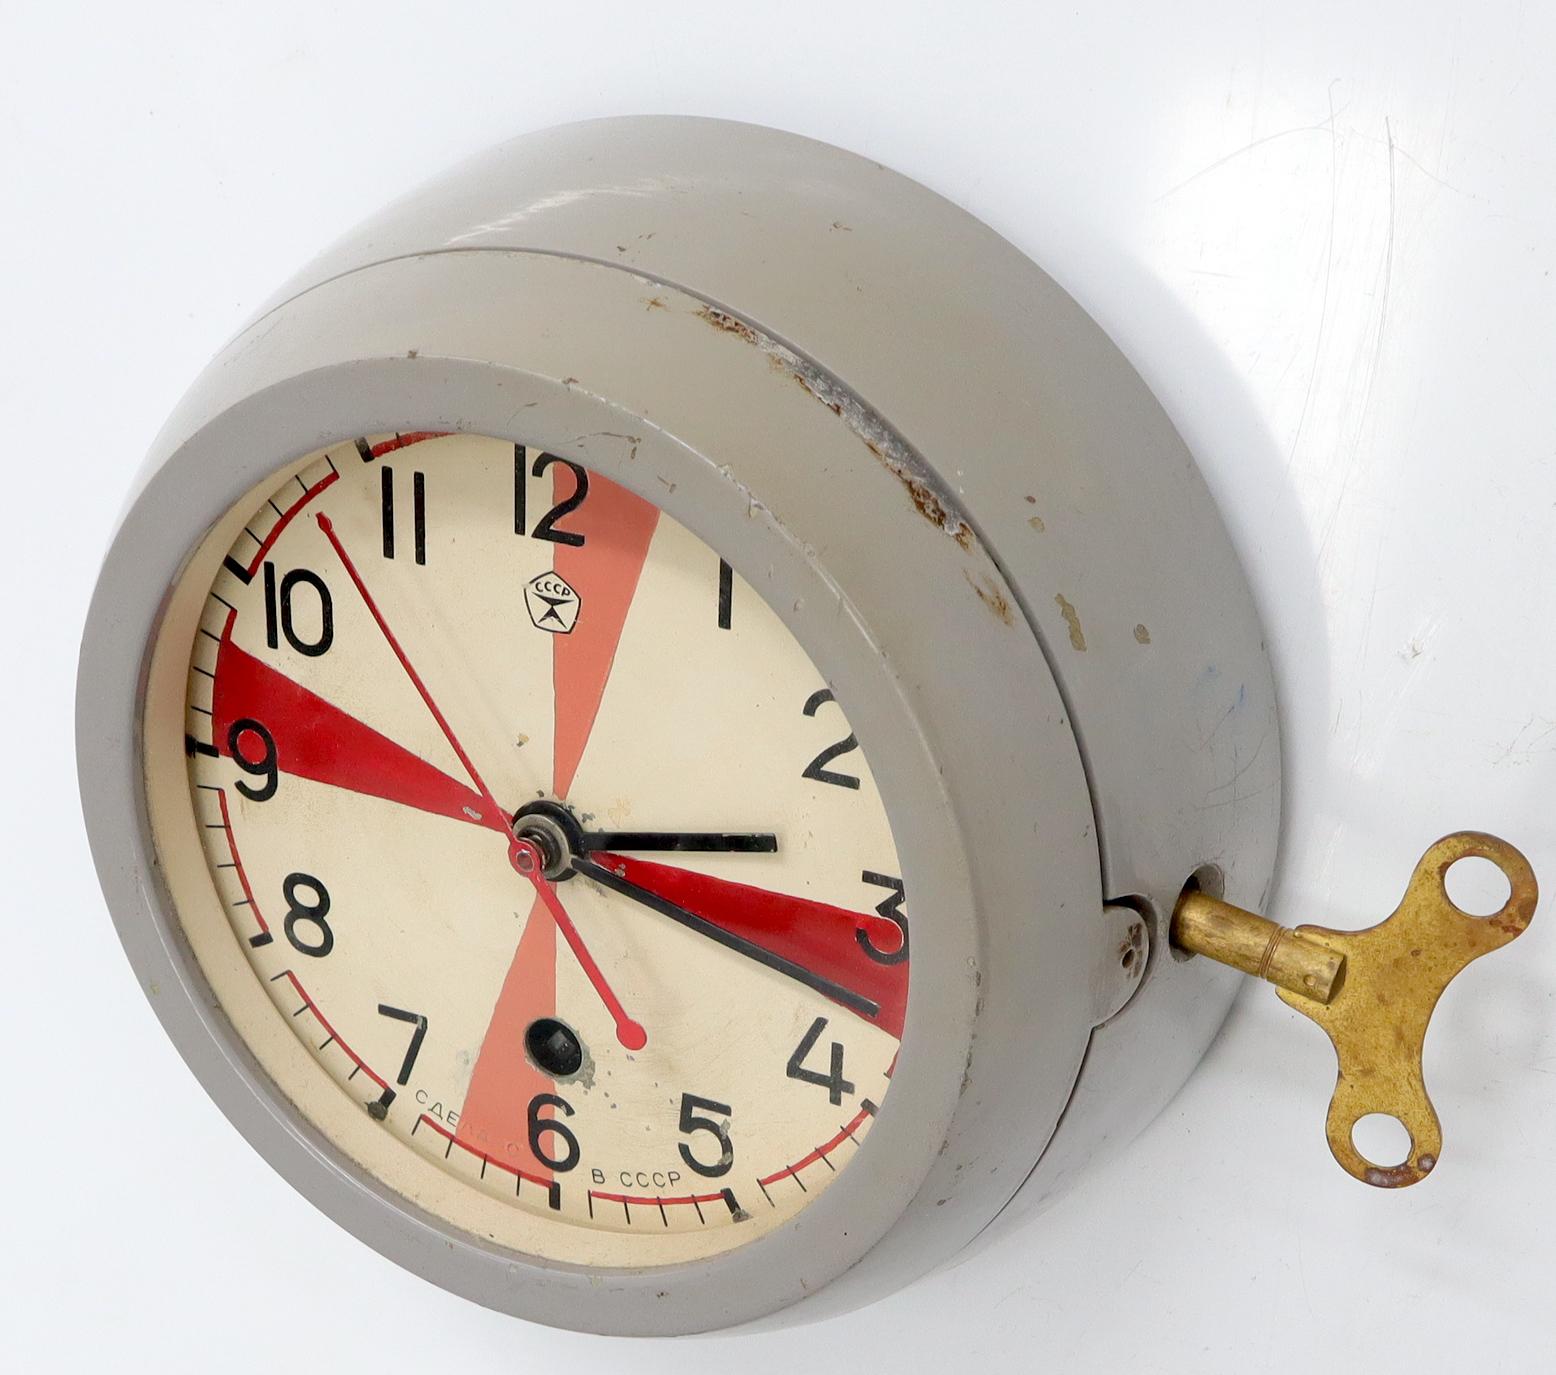 Vintage Space Age era heavy case with lock wall clock, circa 1960s-1970s made in USSR.